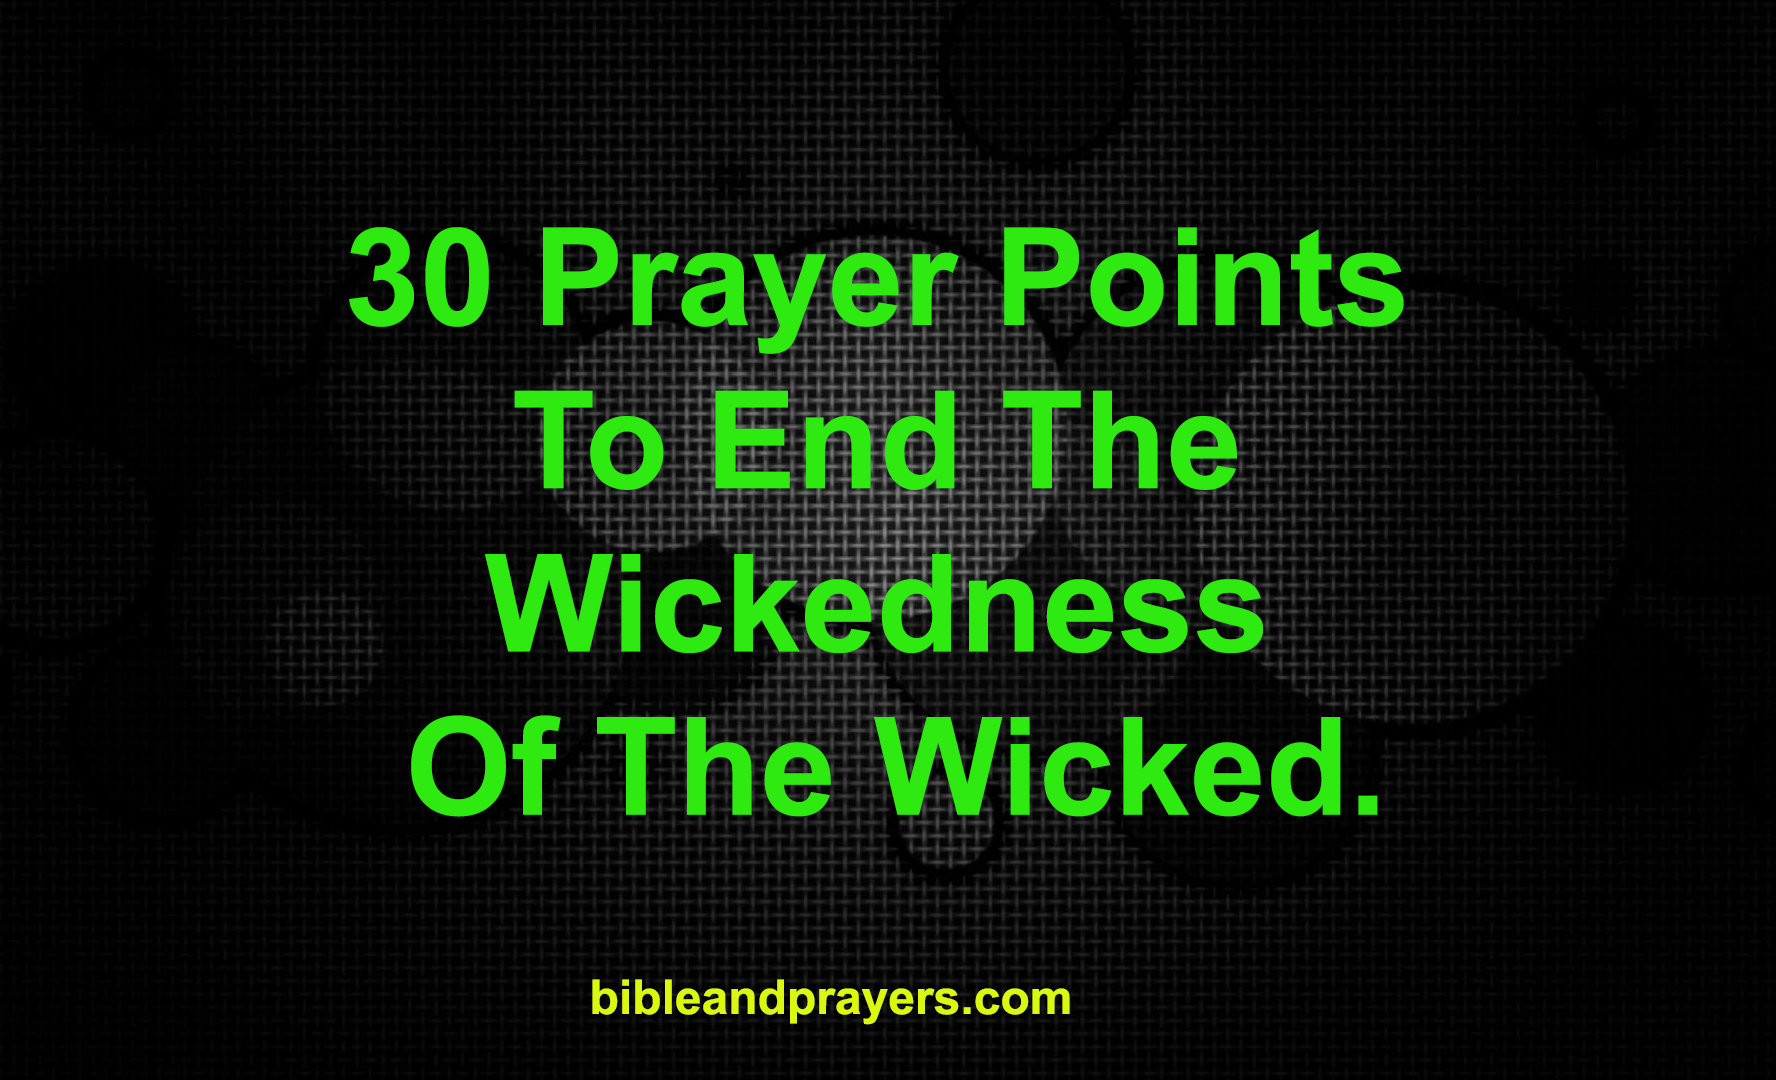 30 Prayer Points To End The Wickedness Of The Wicked.